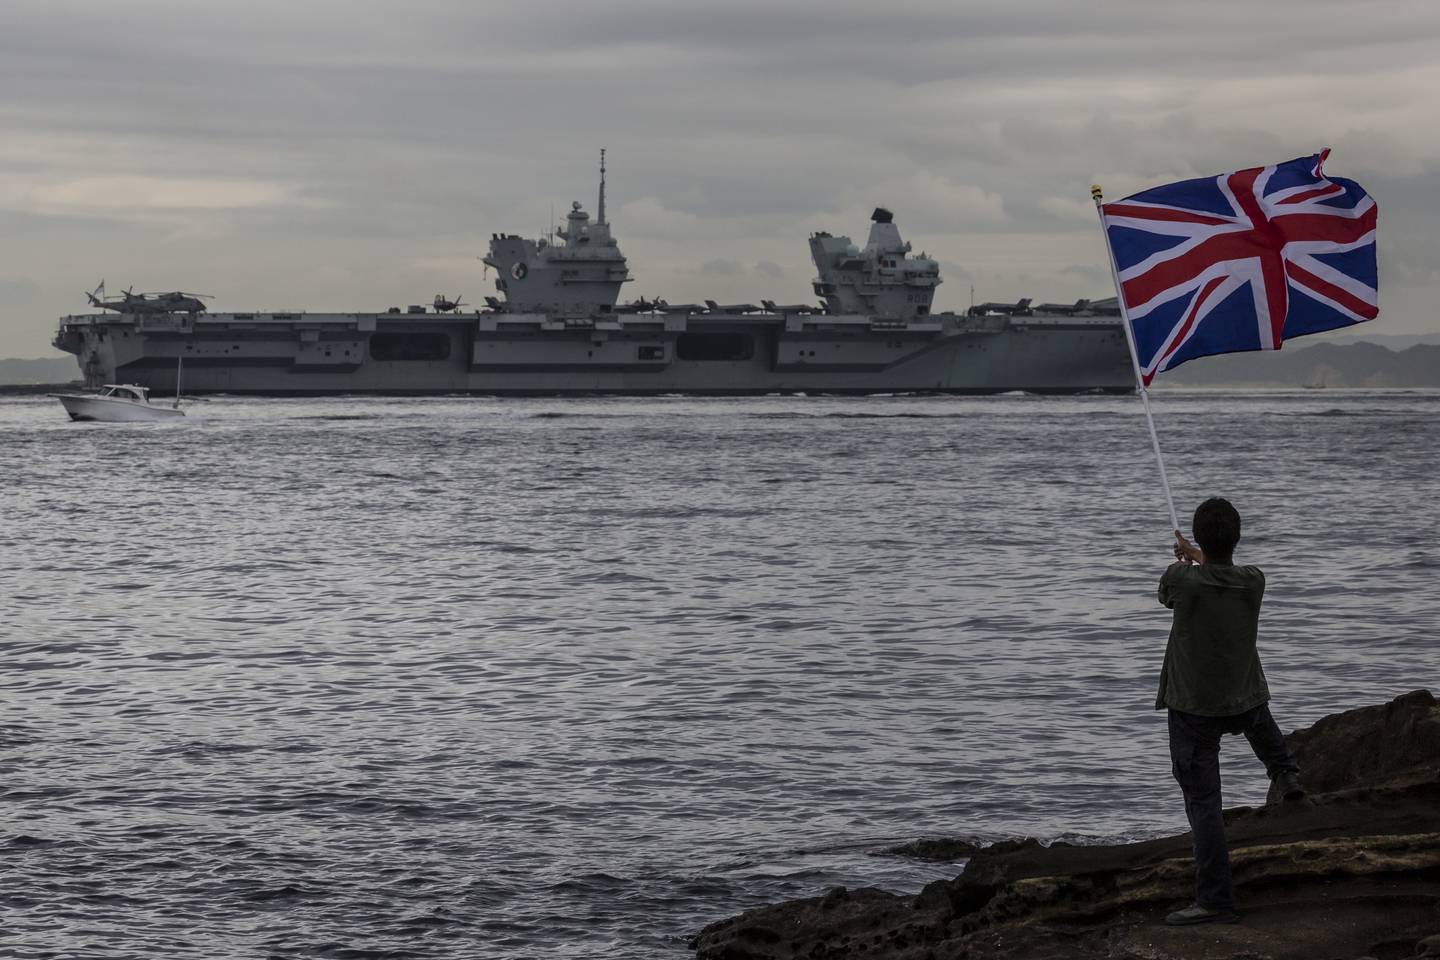 A man waves a British national flag as the British Royal Navy aircraft carrier HMS Queen Elizabeth sails out of Tokyo bay in September. Getty Images